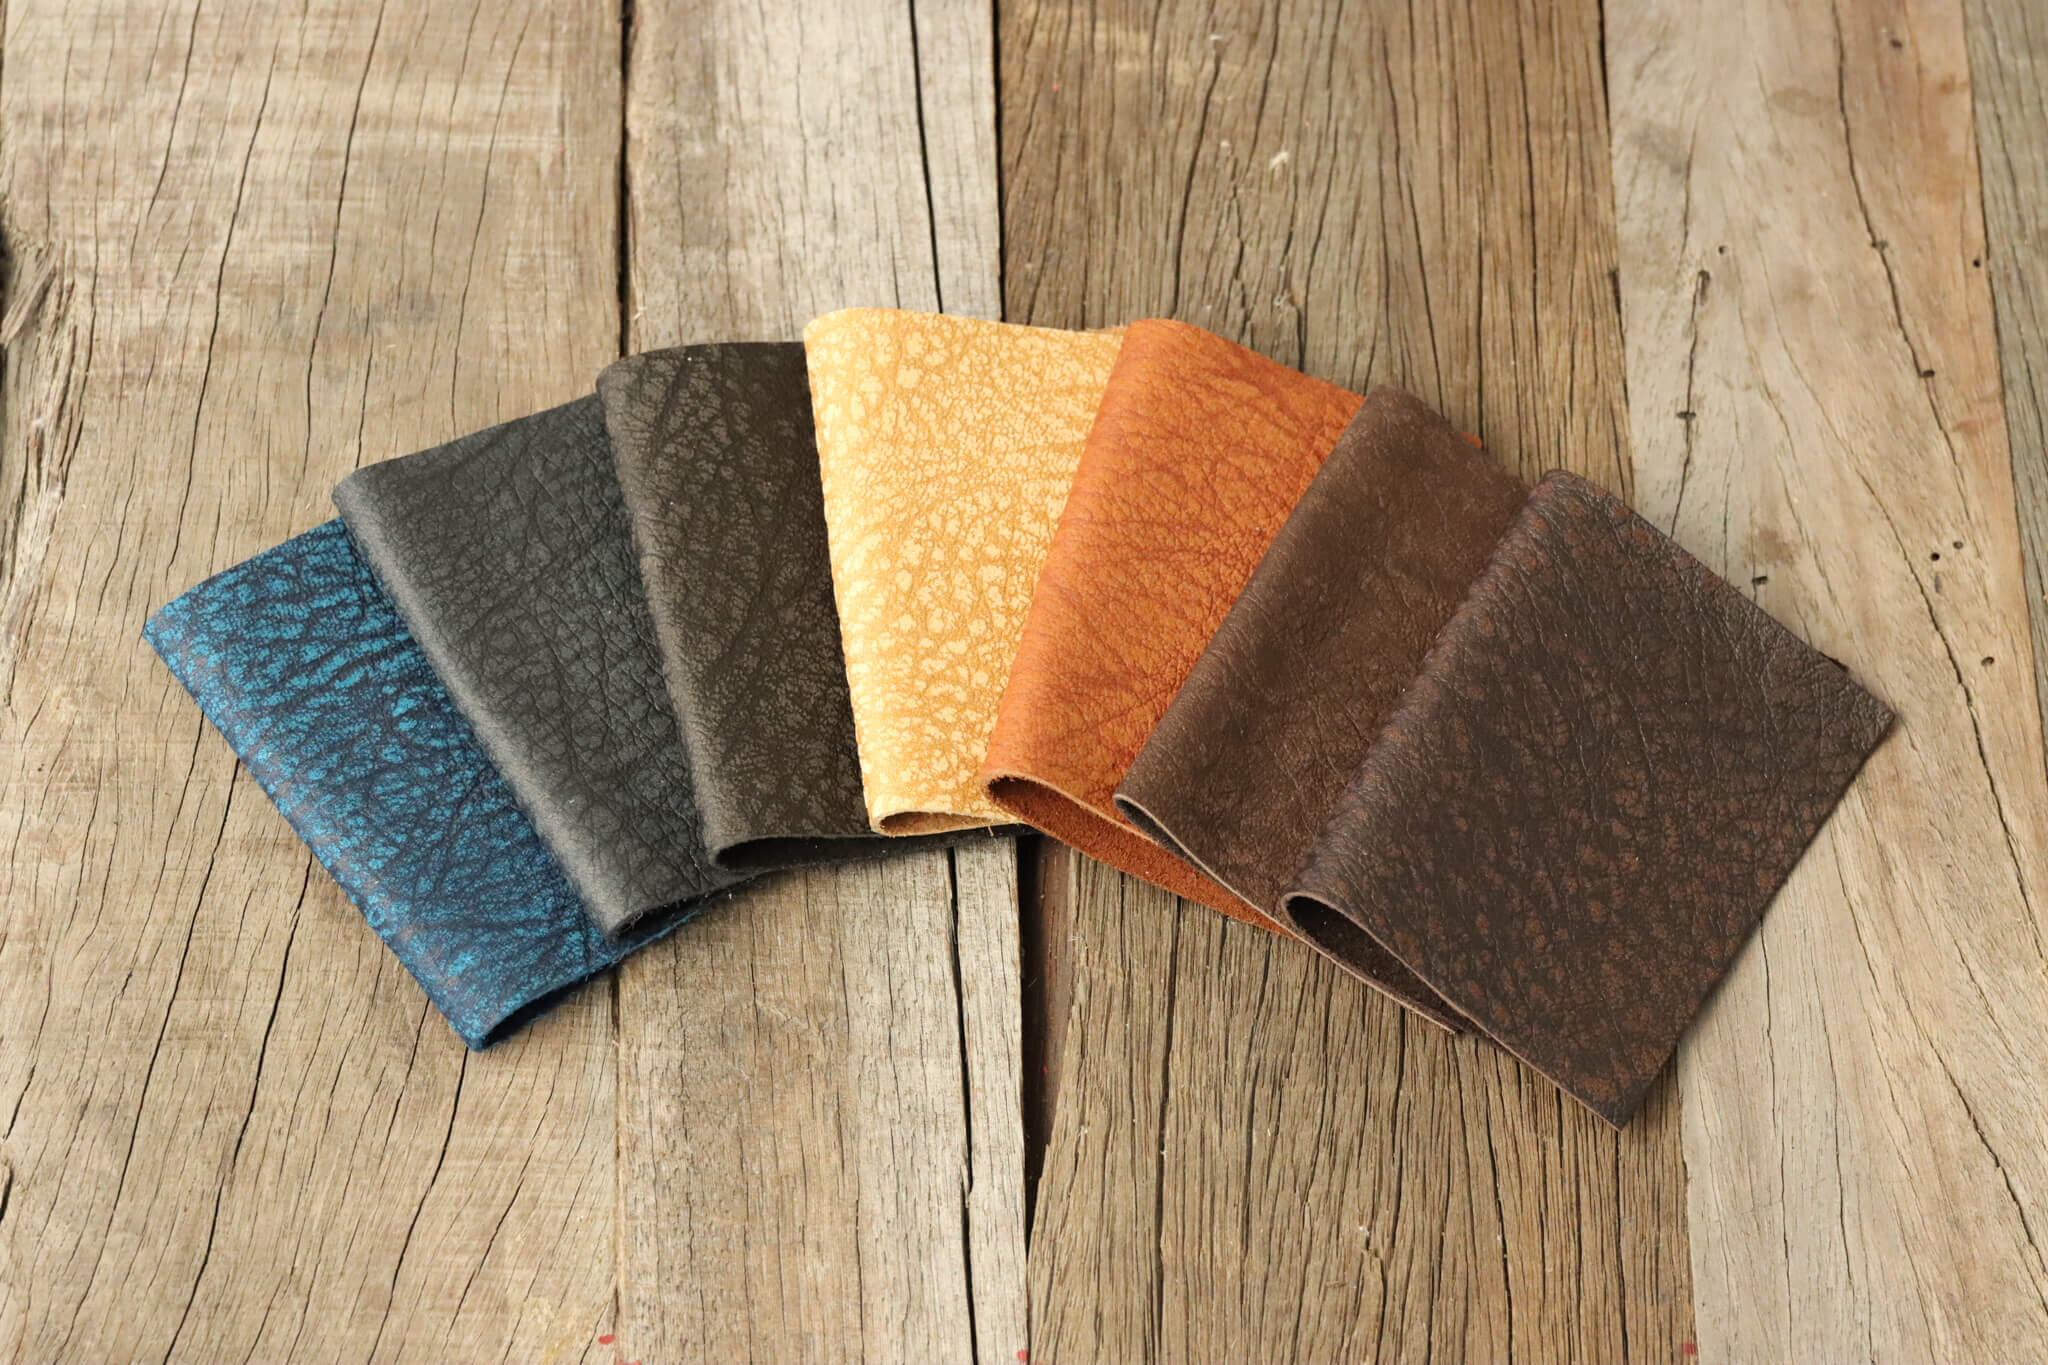 Arazzo Upholstery Leather | The Tannery Row | Leather Distributor